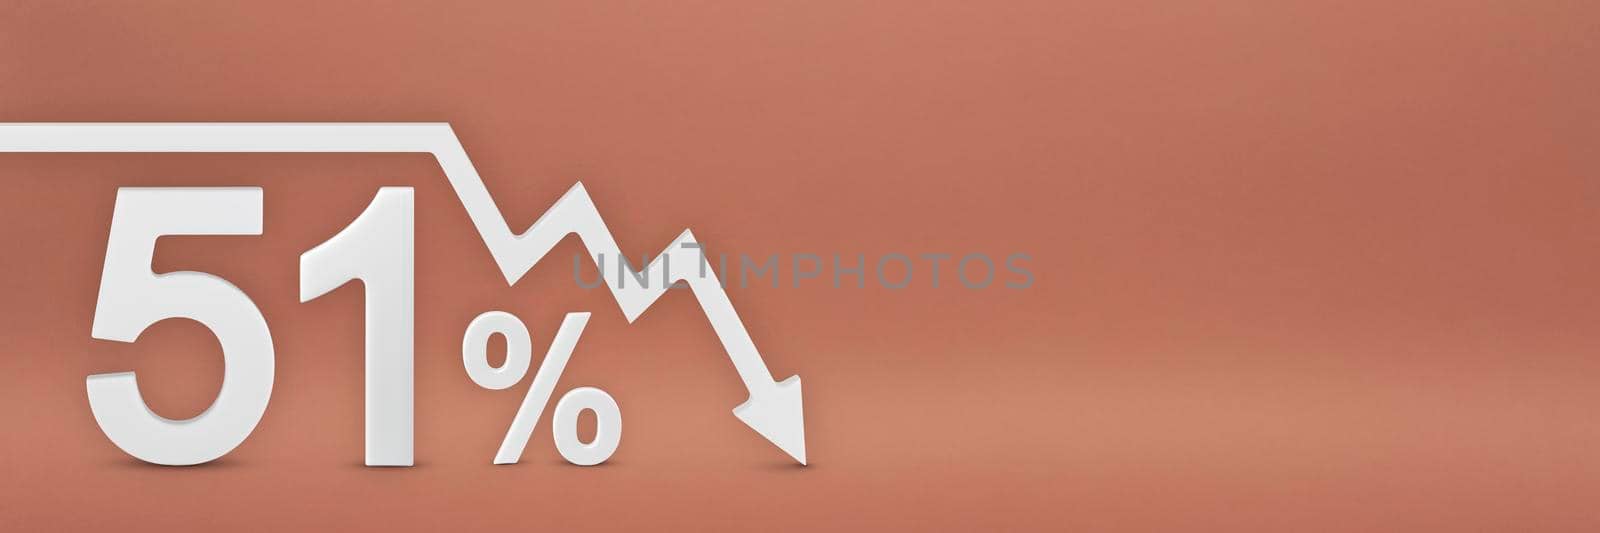 fifty-one percent, the arrow on the graph is pointing down. Stock market crash, bear market, inflation.Economic collapse, collapse of stocks.3d banner,51 percent discount sign on a red background. by SERSOL